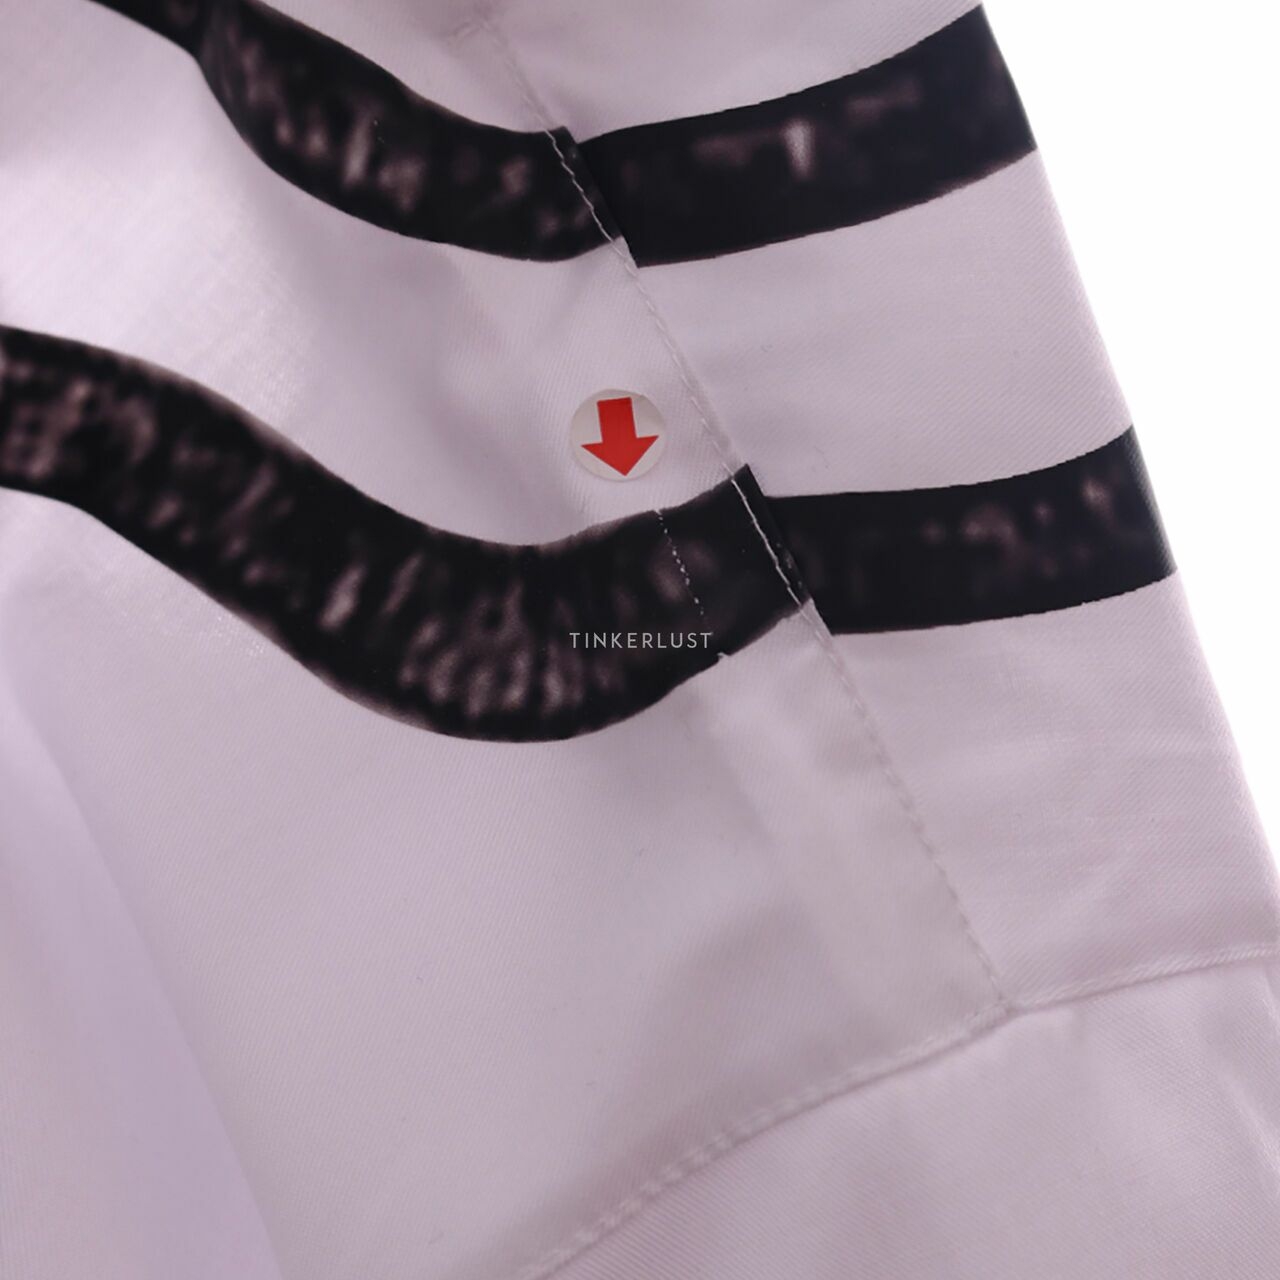 Private Collection White Shirt